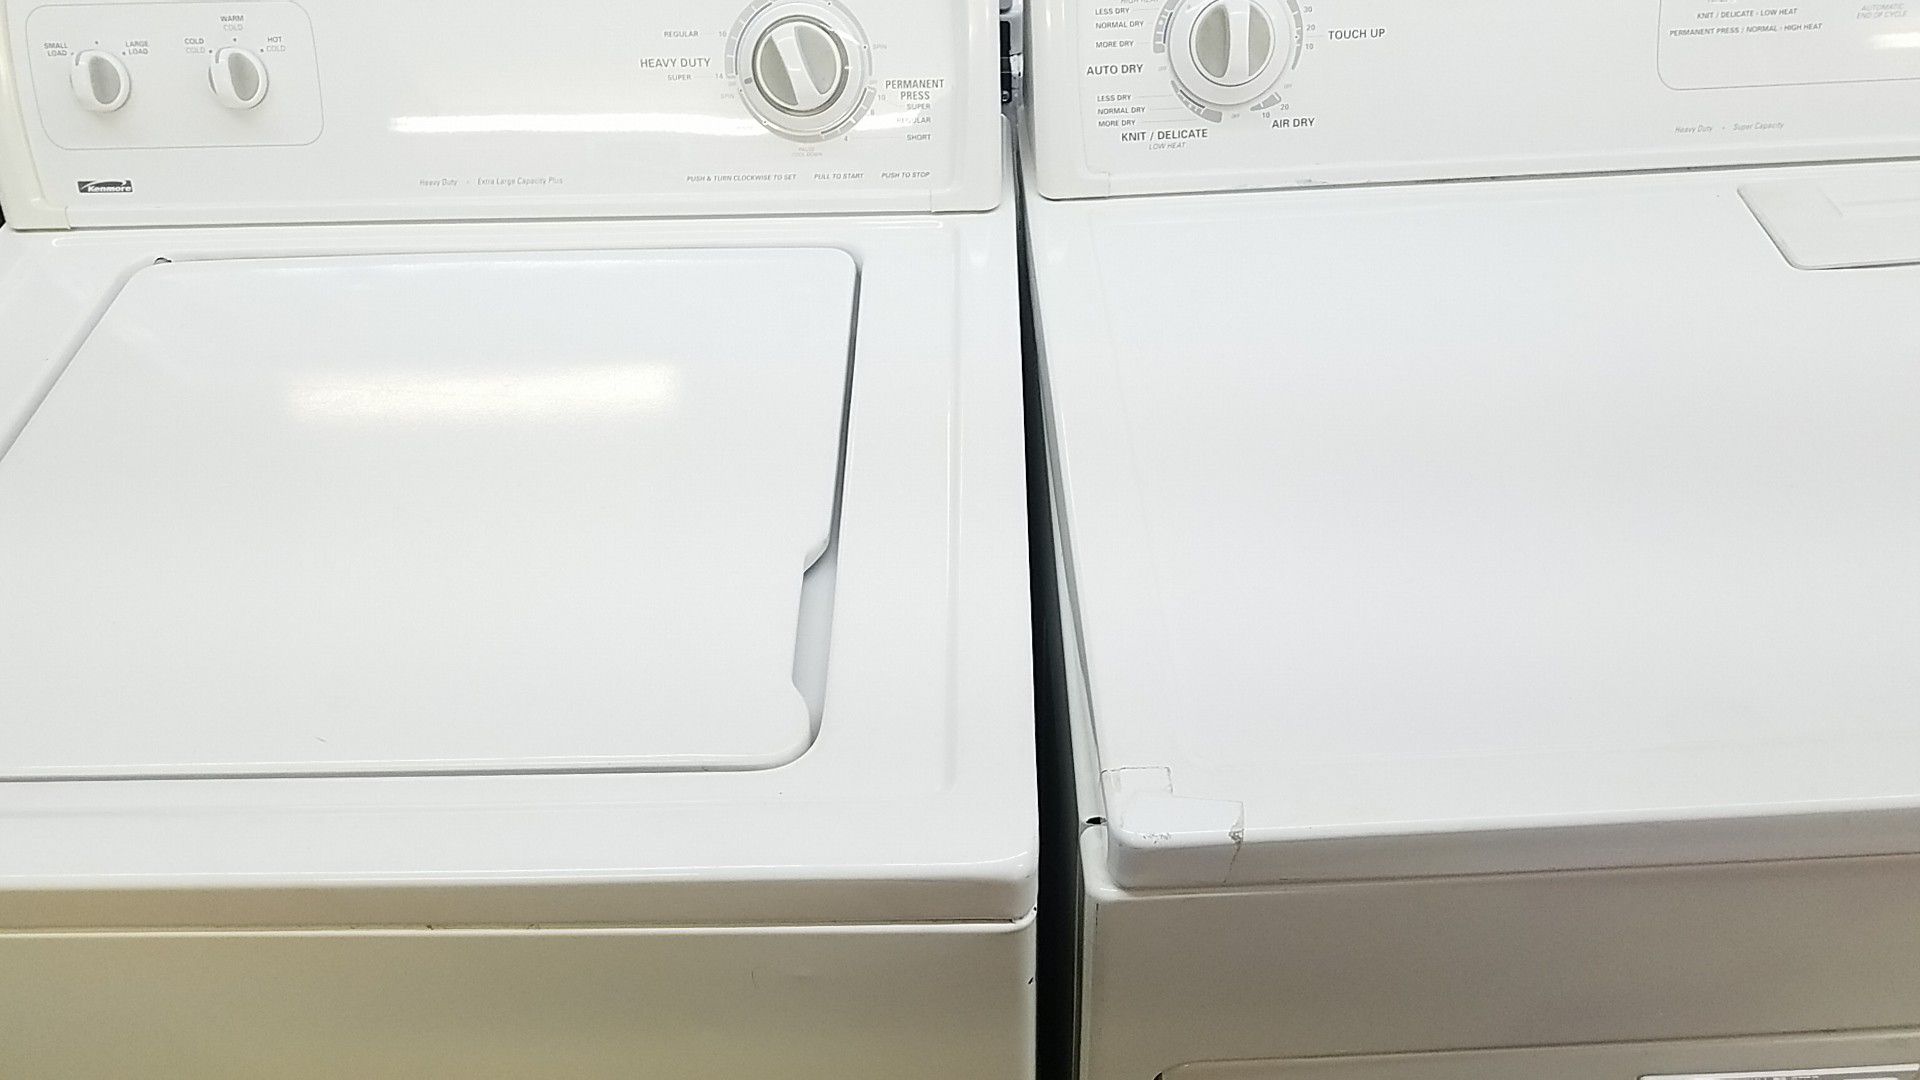 Washer and dryer set Kenmore gas dryer